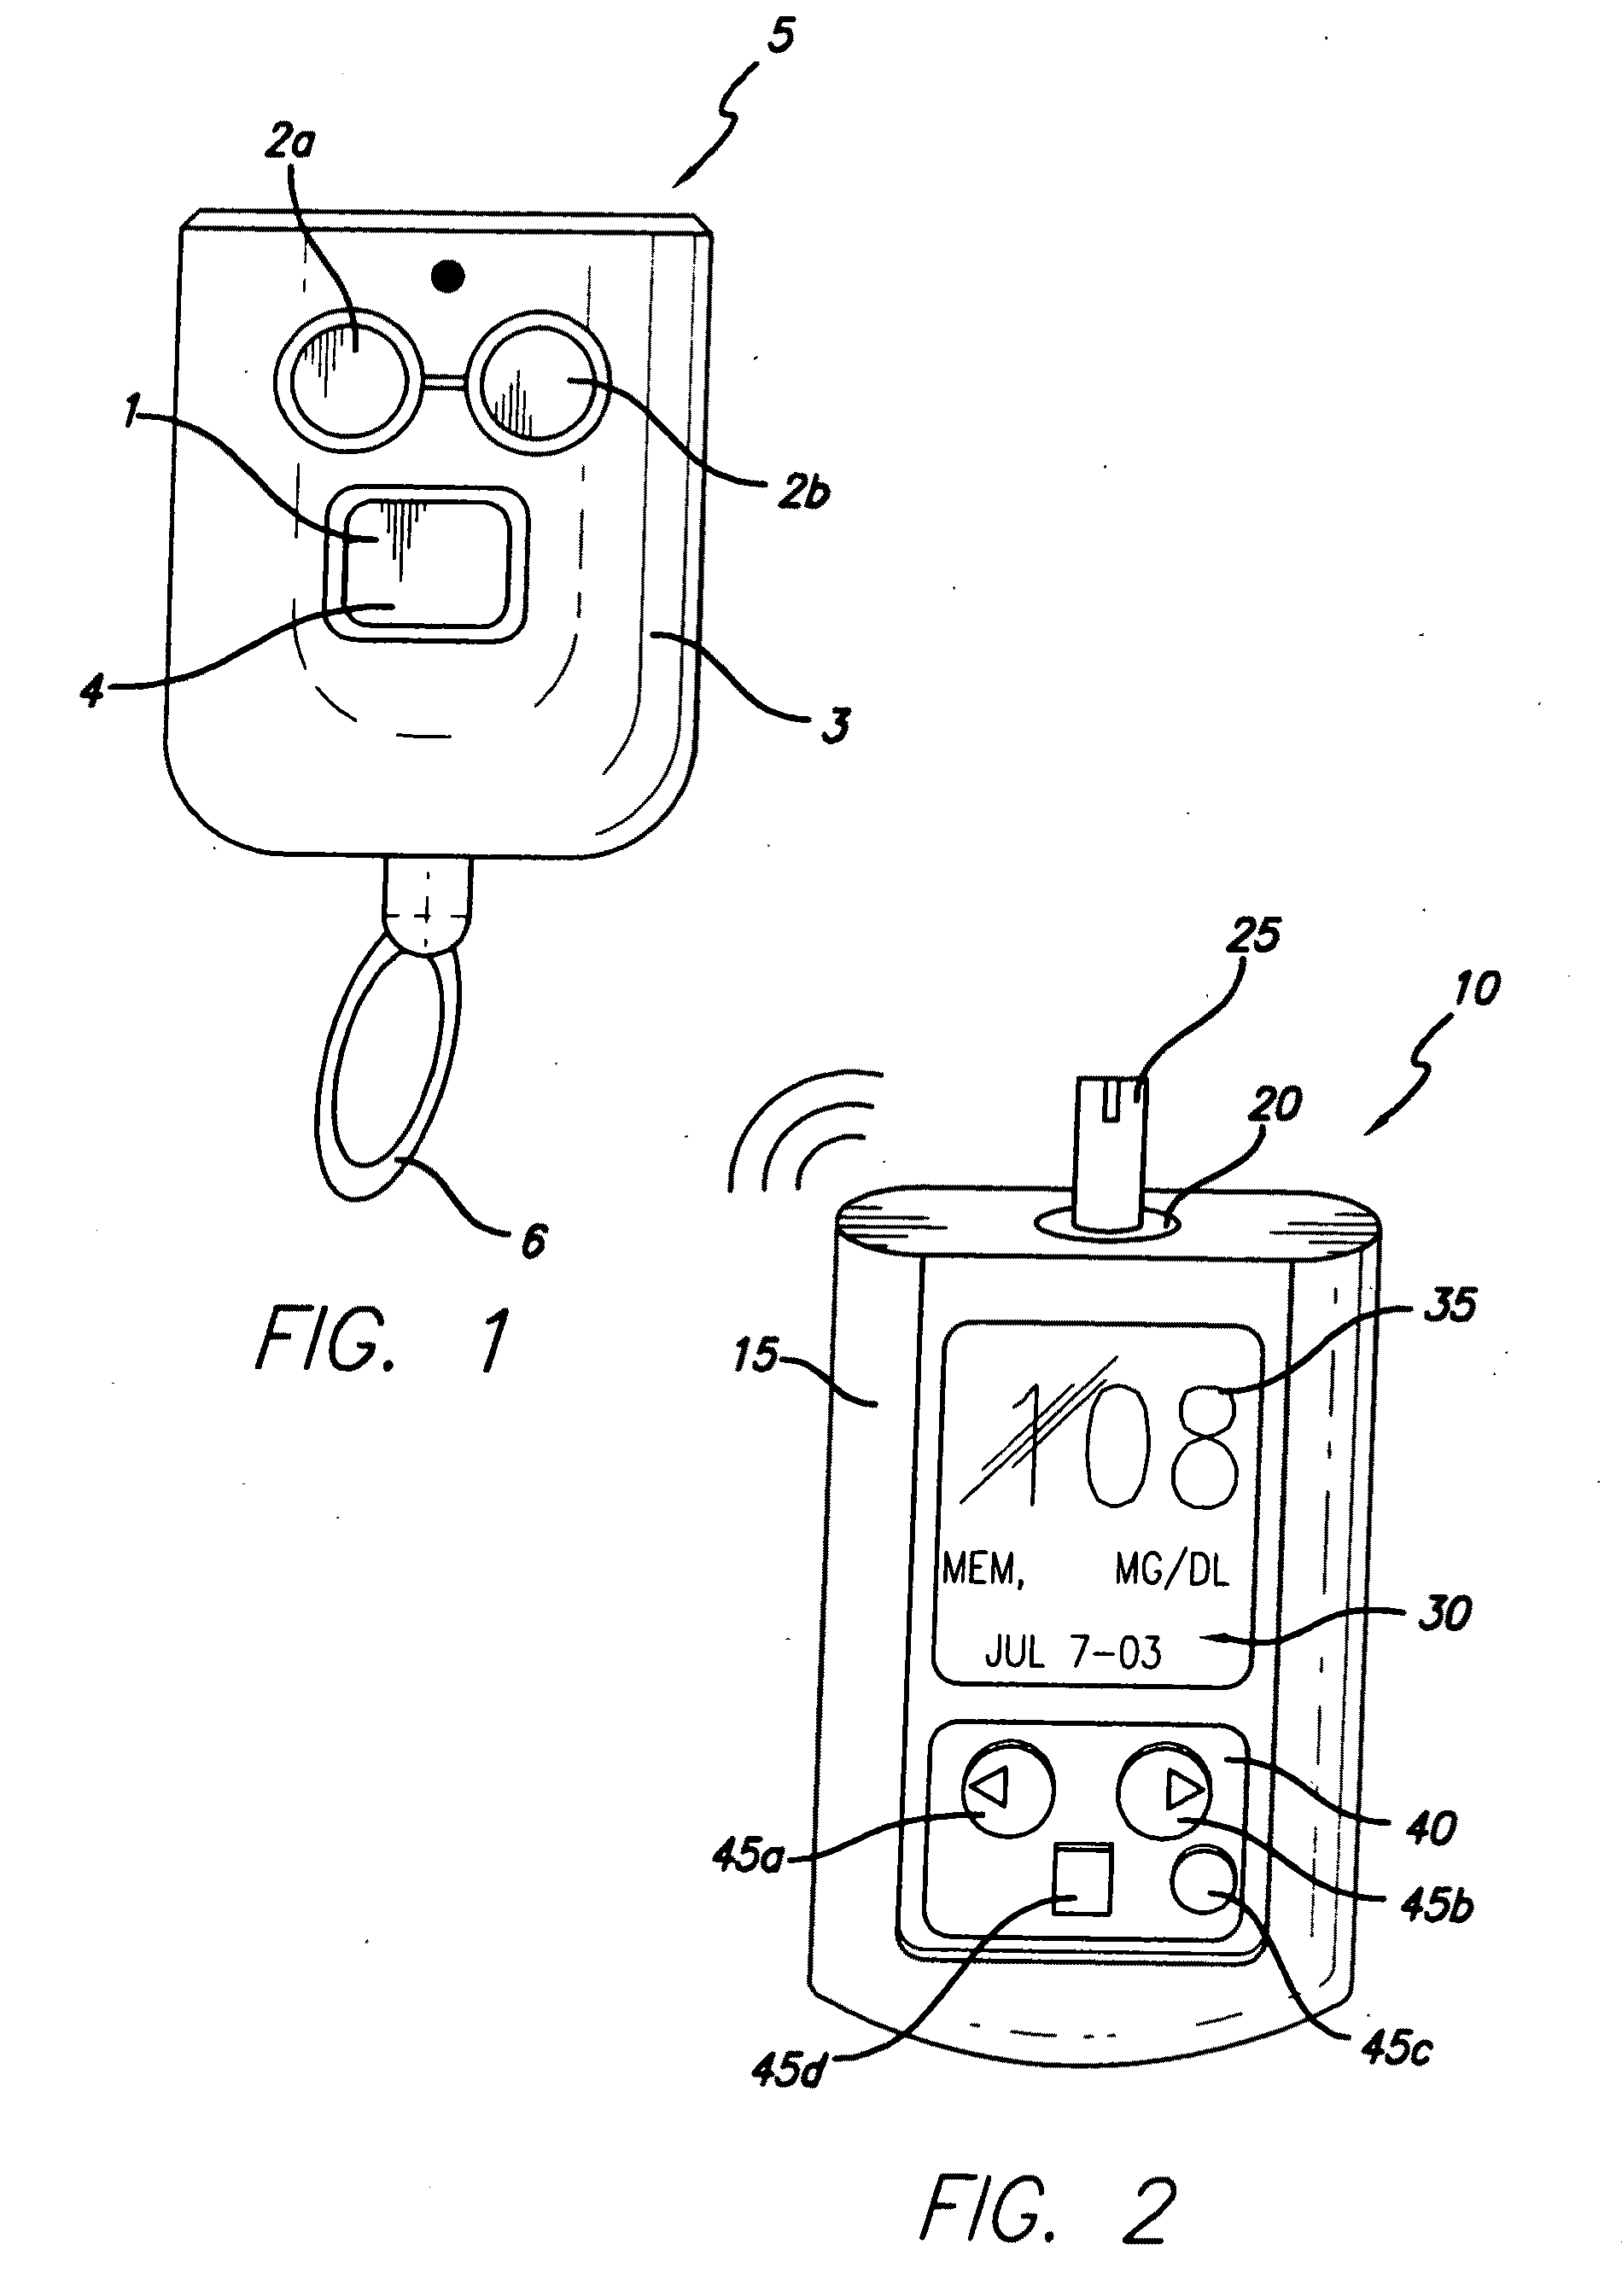 Controller device for an infusion pump